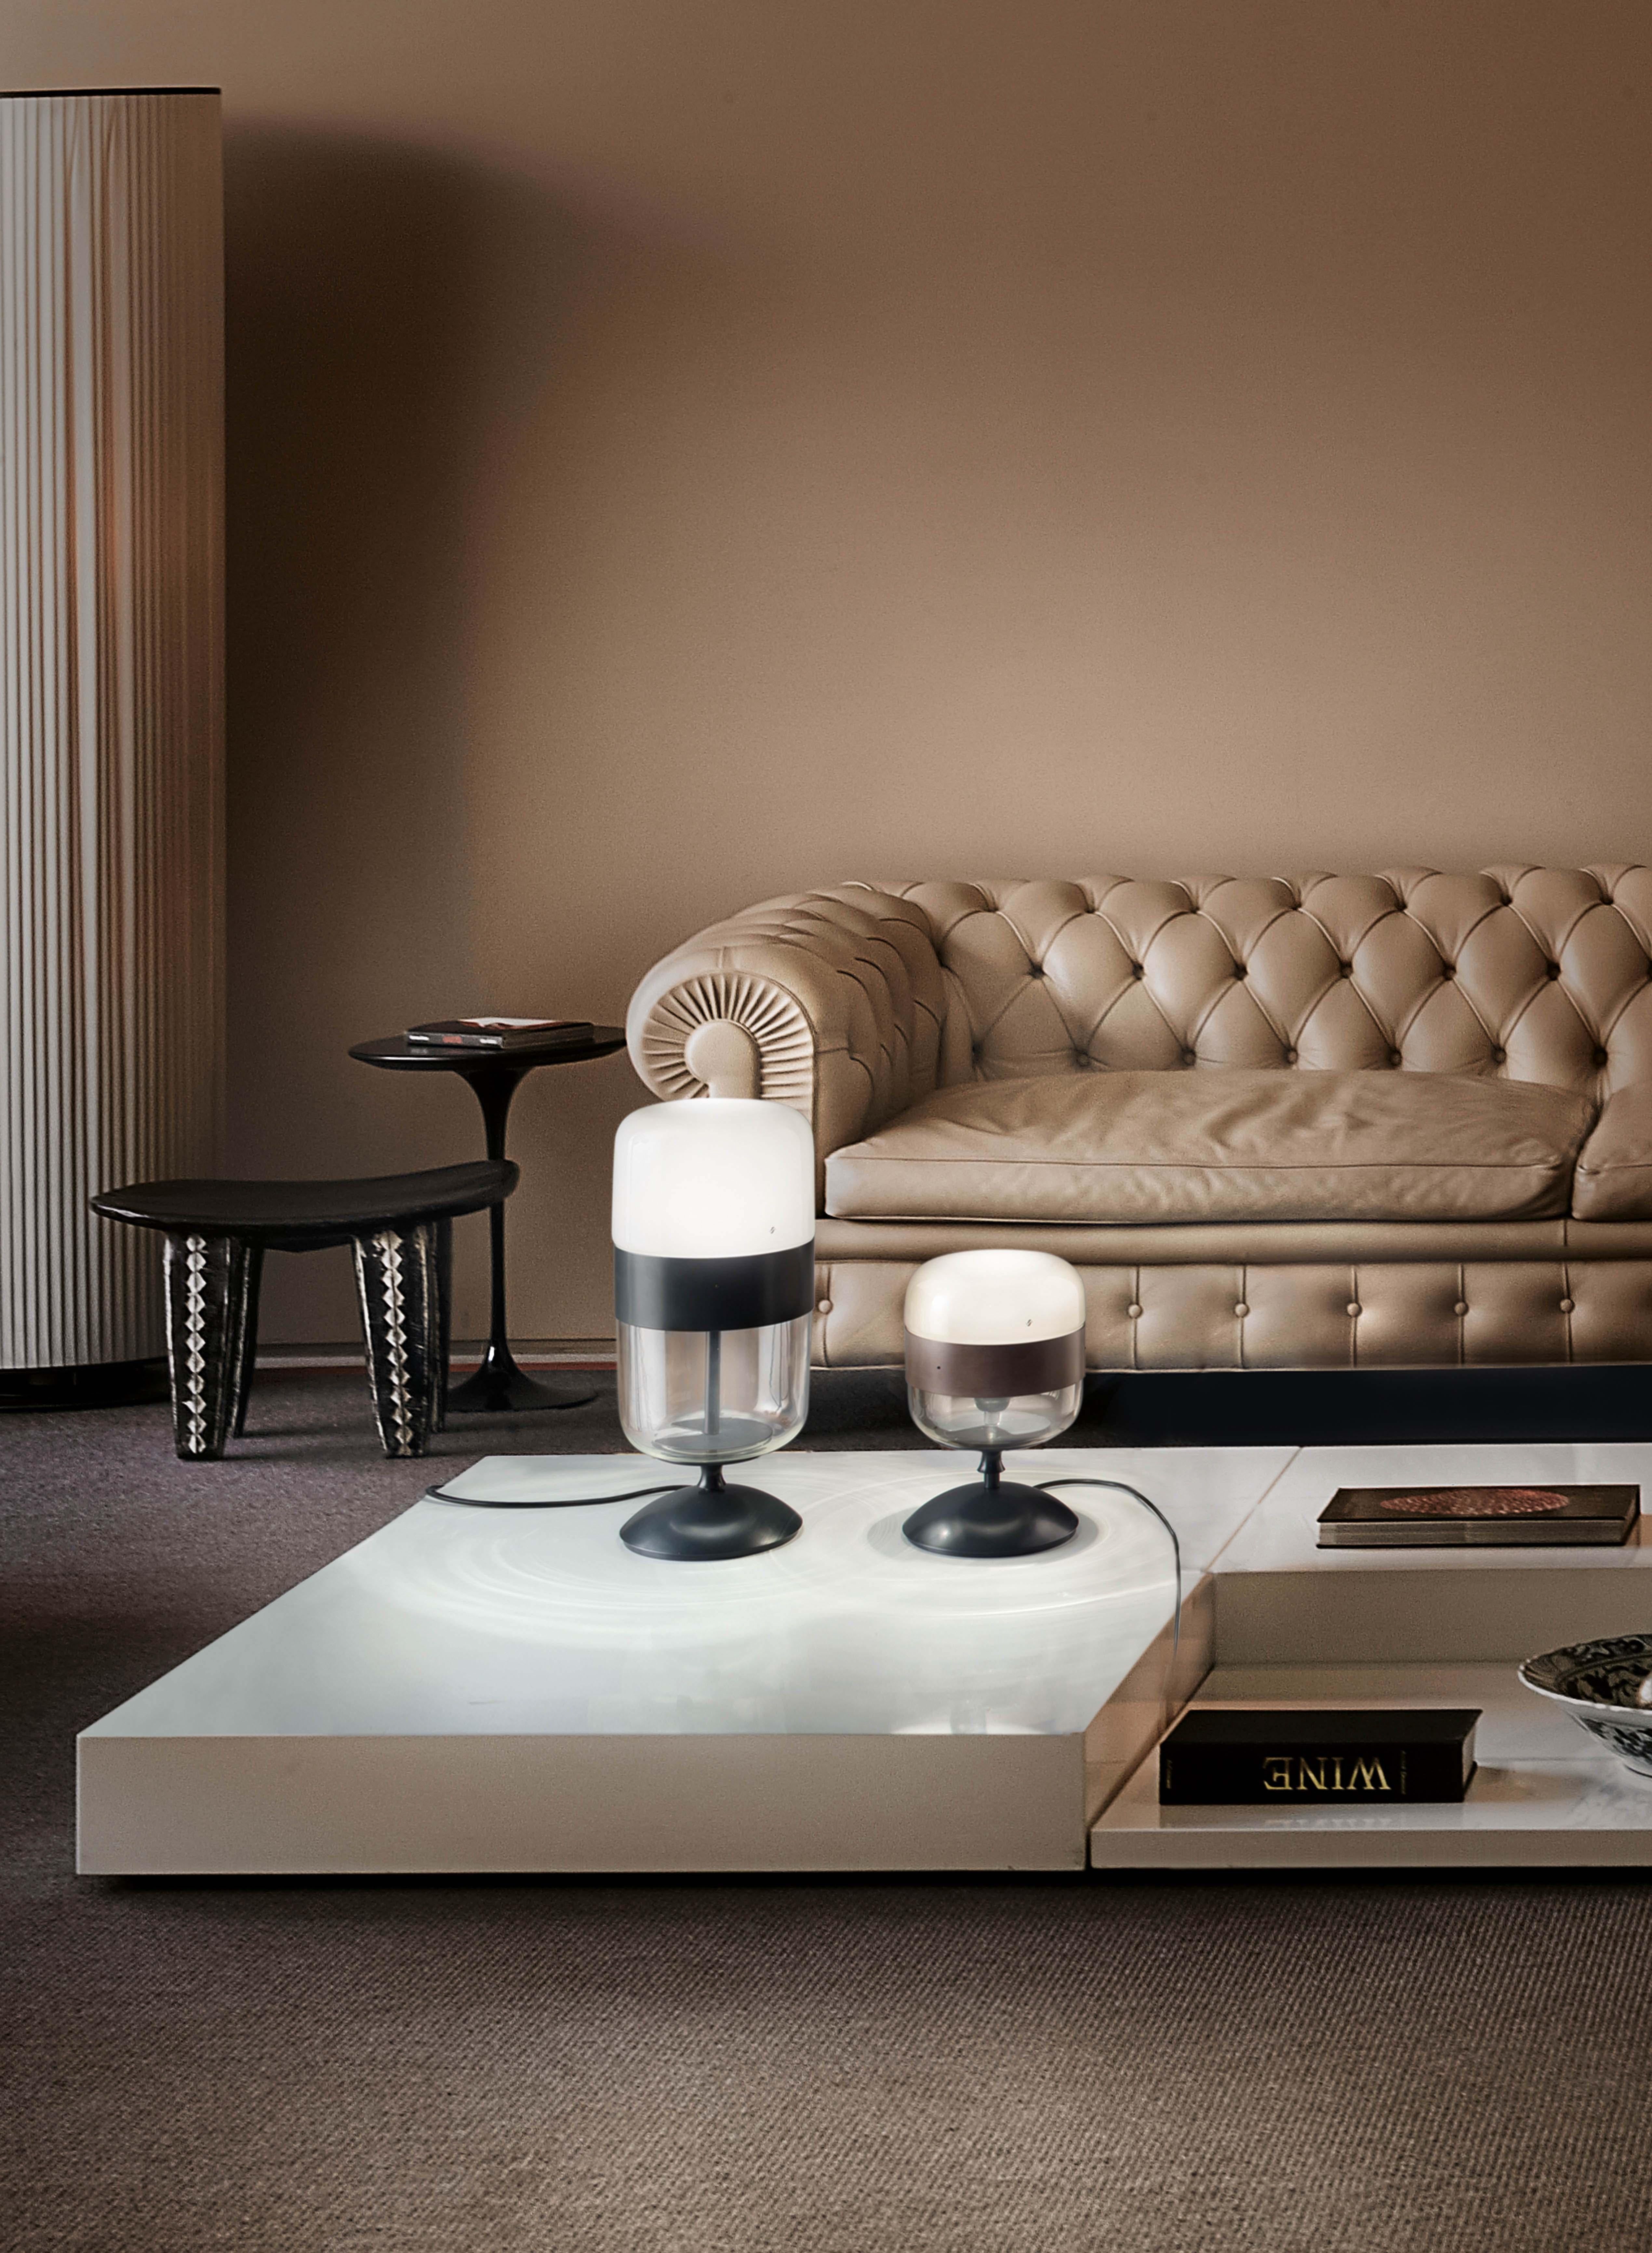 Modern Vistosi Futura Small Table Lamp with Black Frame by Hangar Design Group For Sale